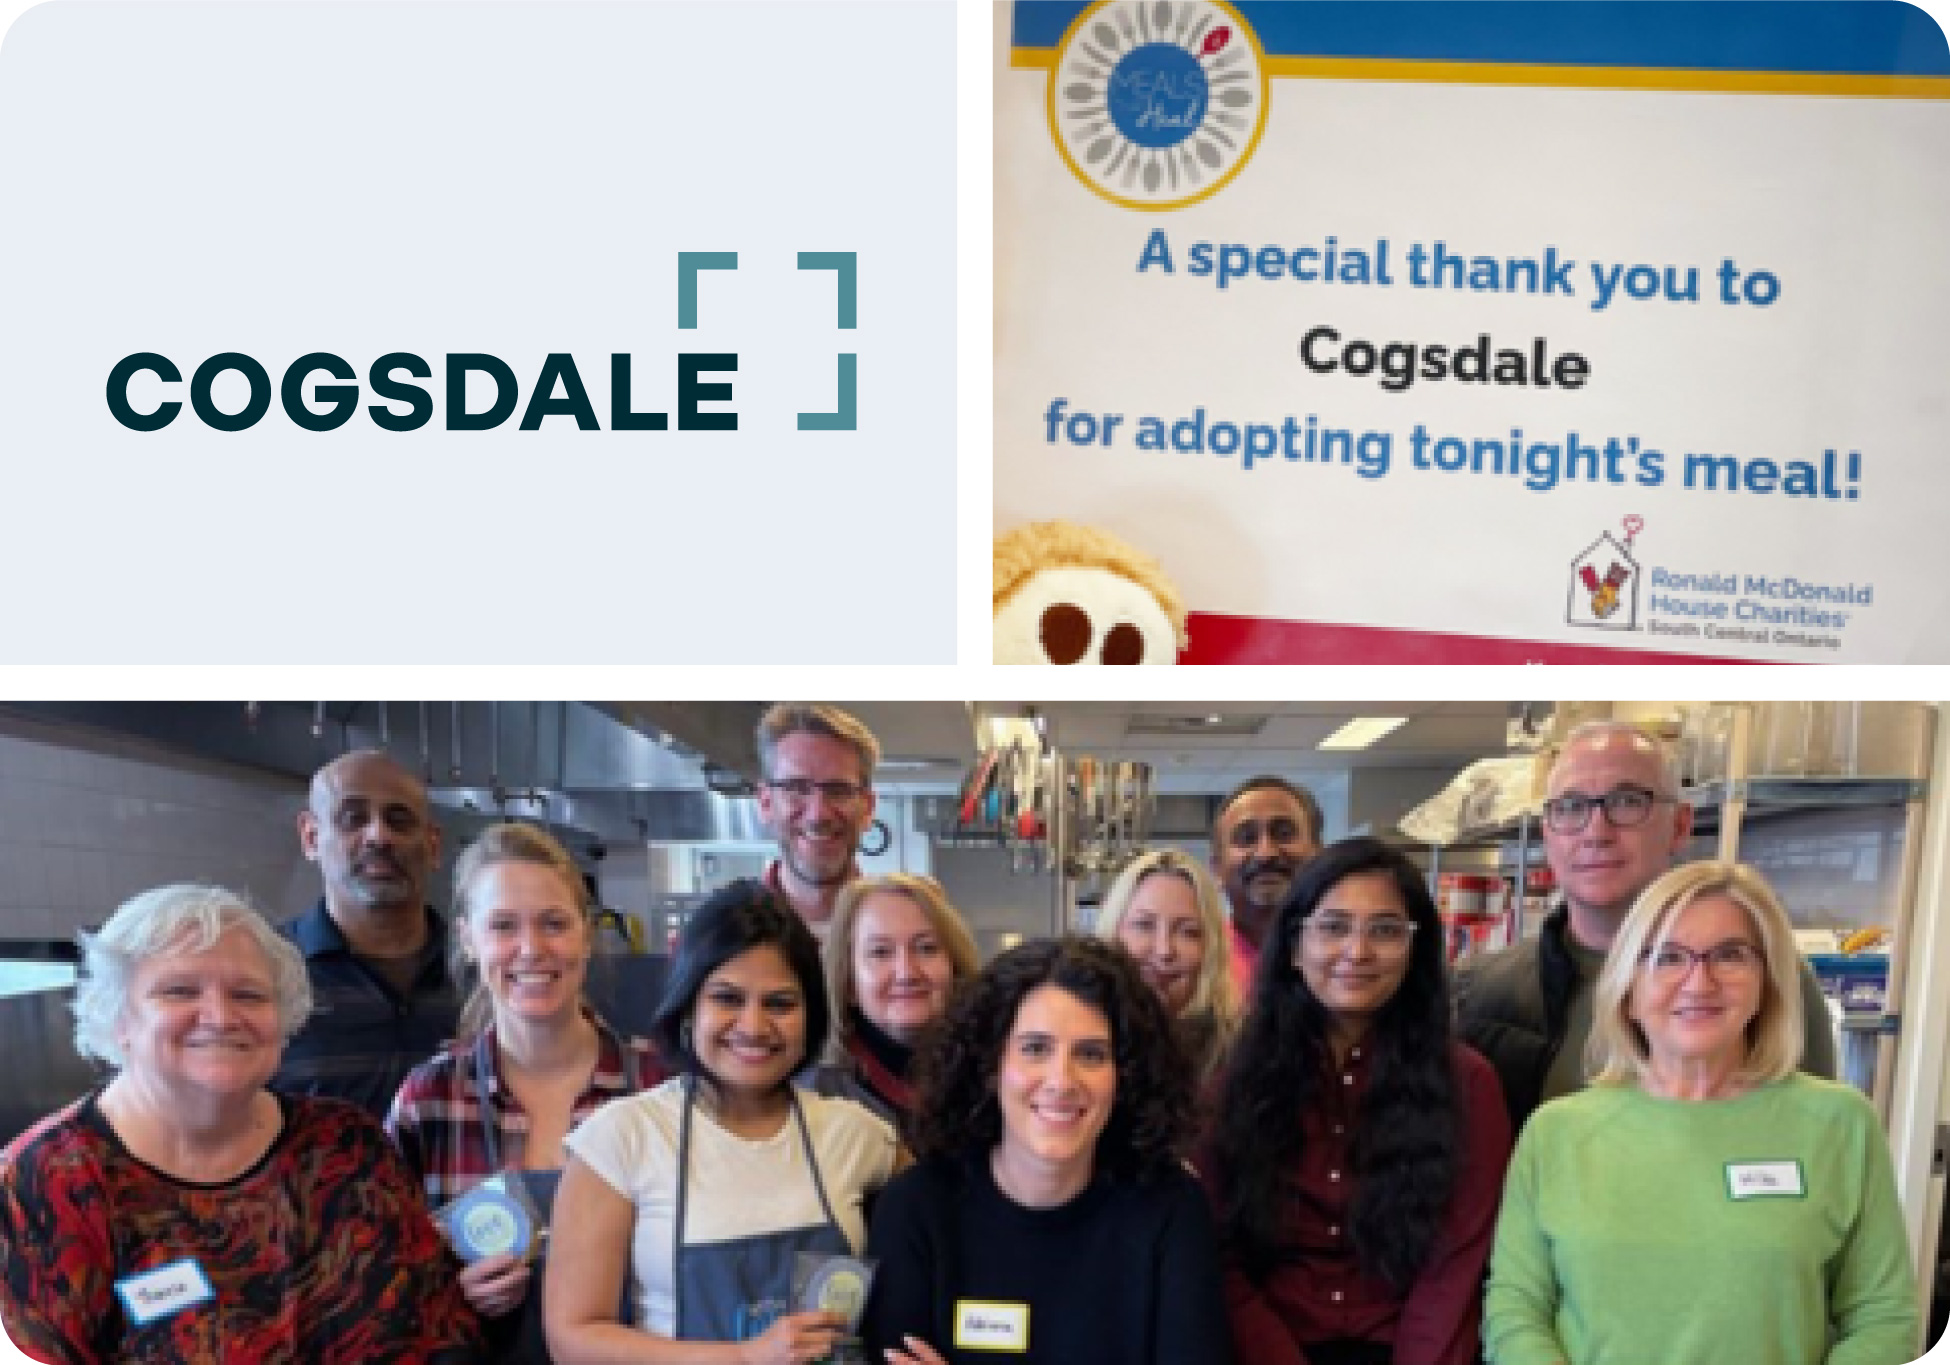 Cogsdale employees volunteer at the Ronald McDonald House in Hamilton, Ontario by preparing meals for 40 families